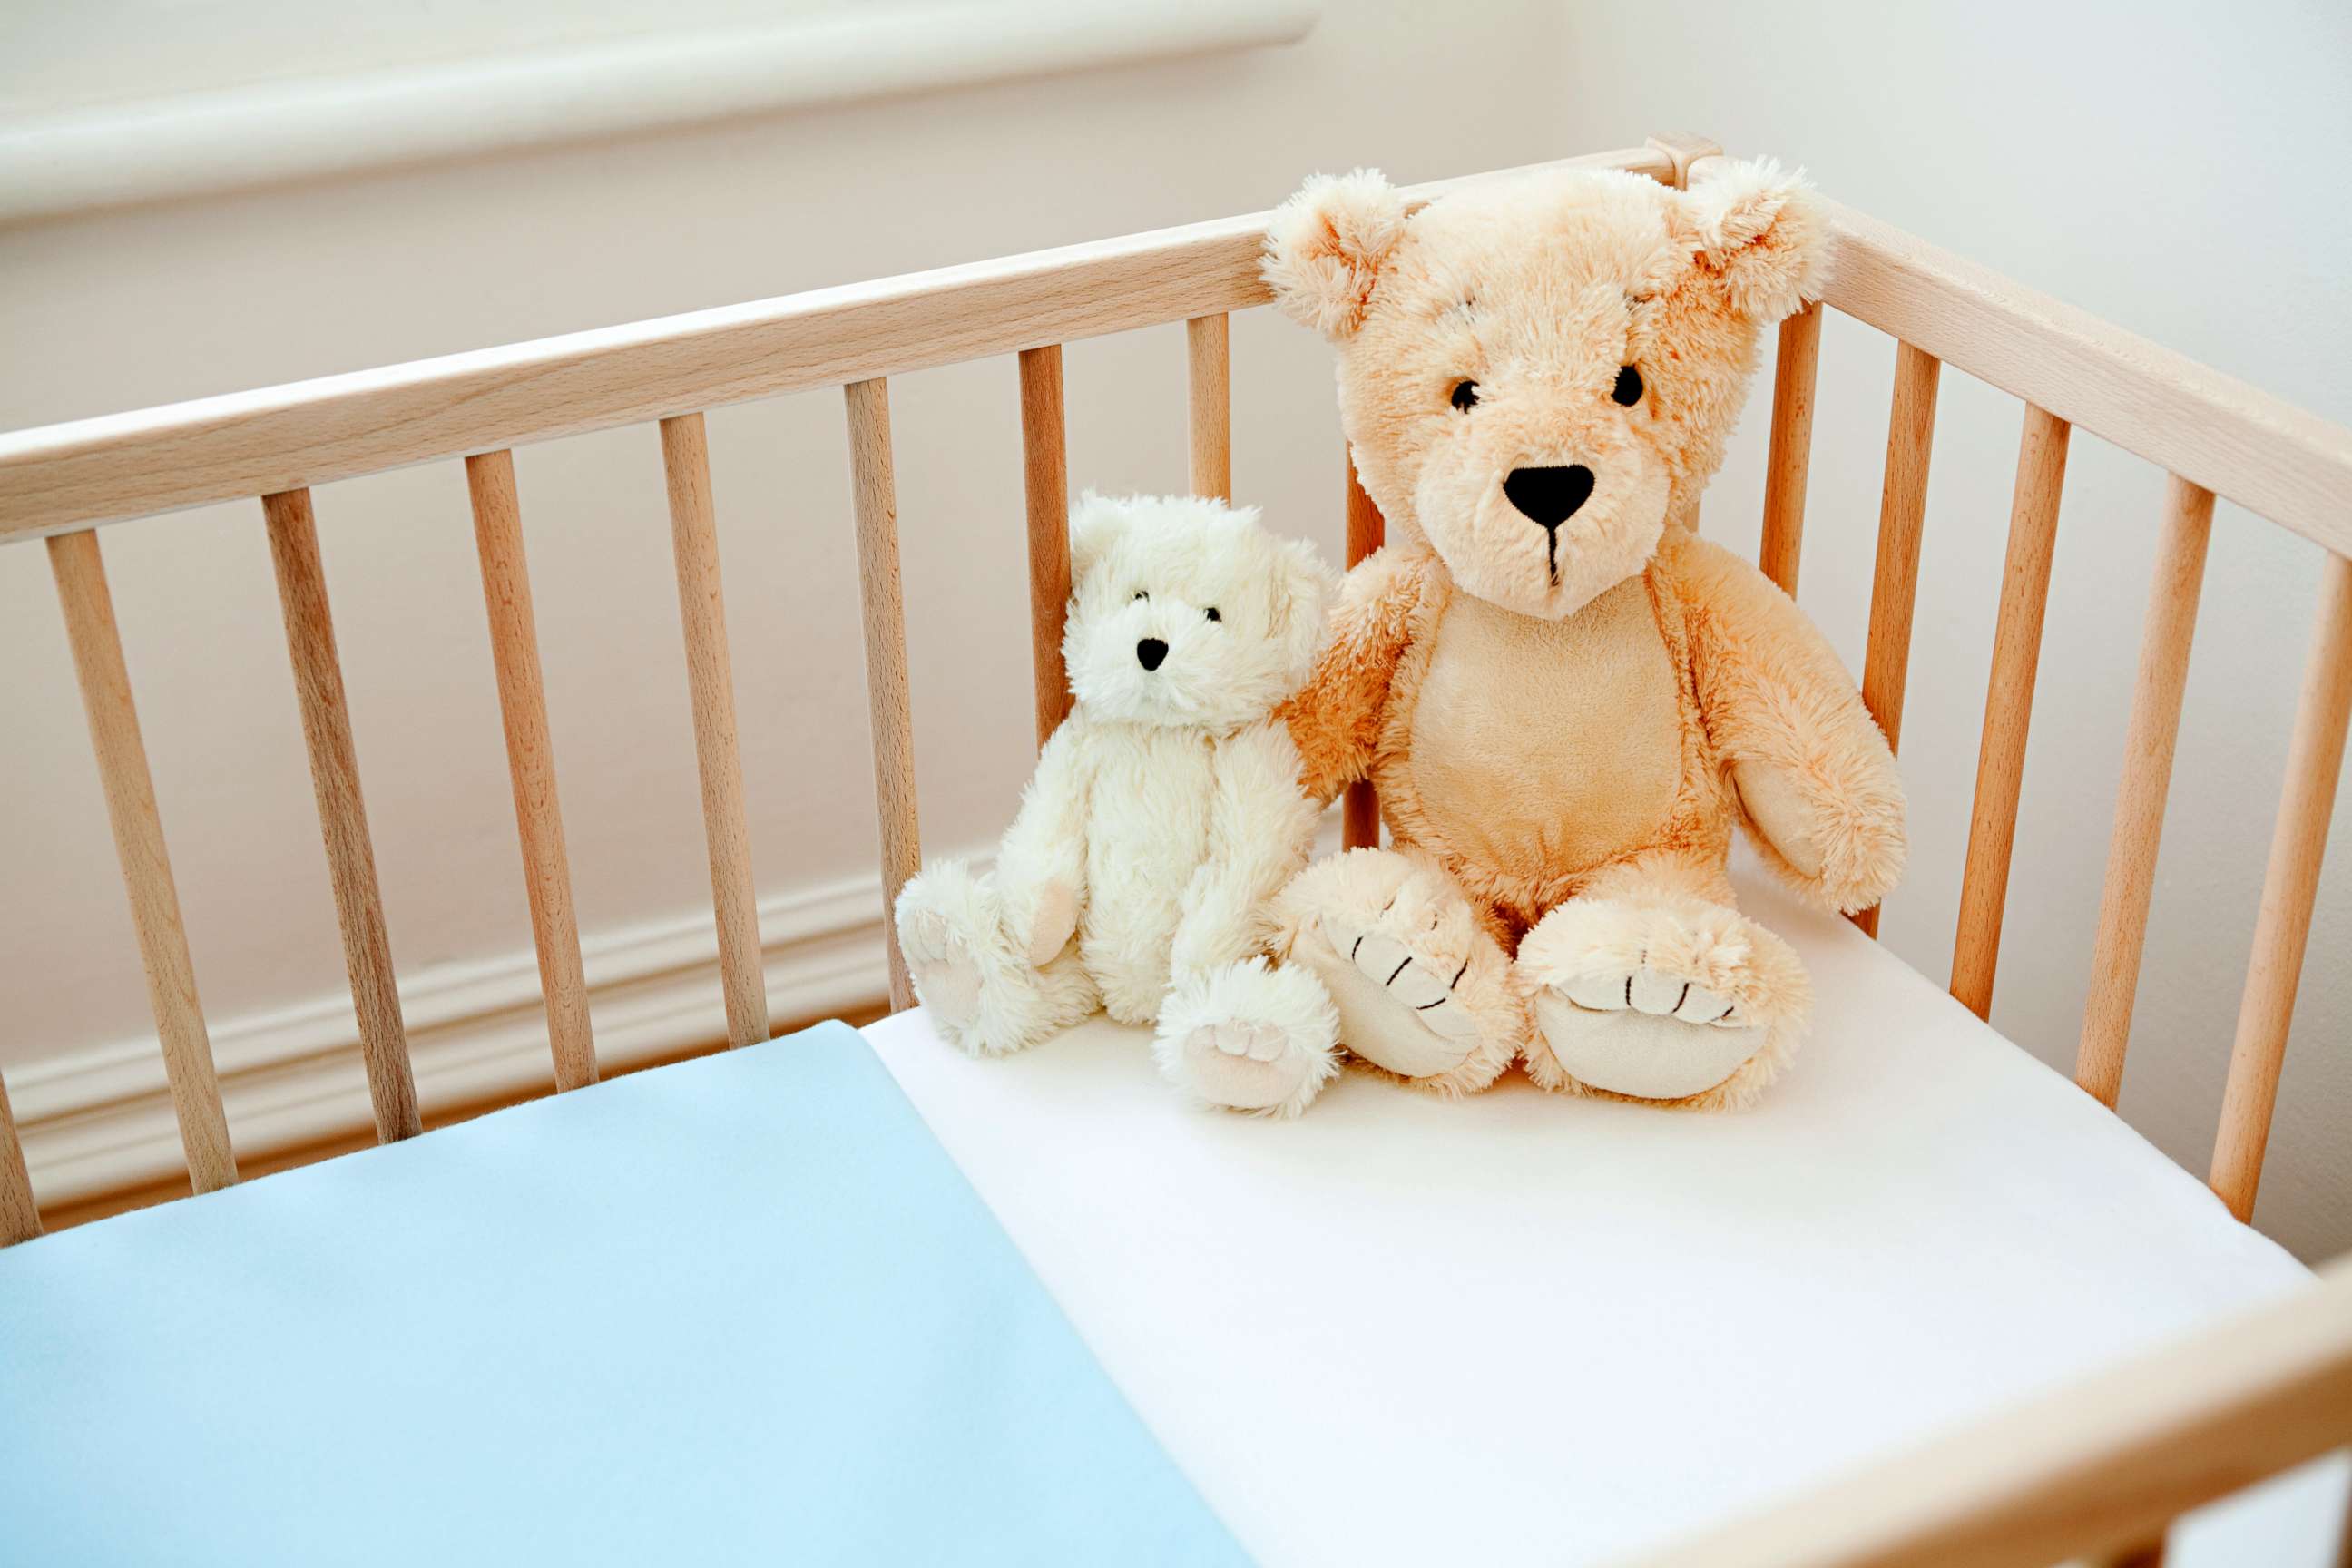 PHOTO: Stock photo of a baby's crib with stuffed plush toys.